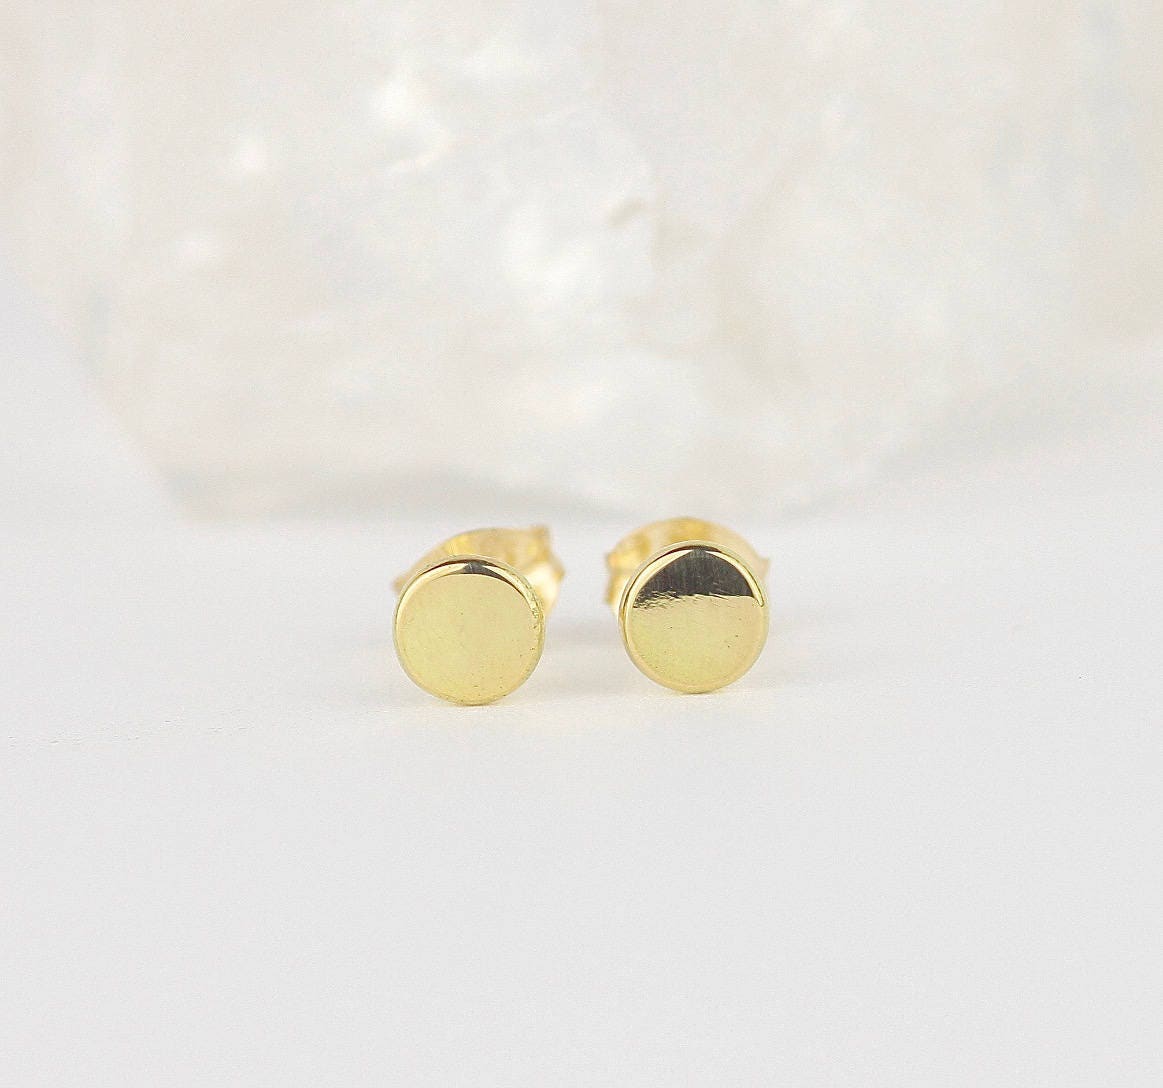 Dainty 18ct Gold Stud Earrings. Minimal Delicate Studs. Small | Etsy